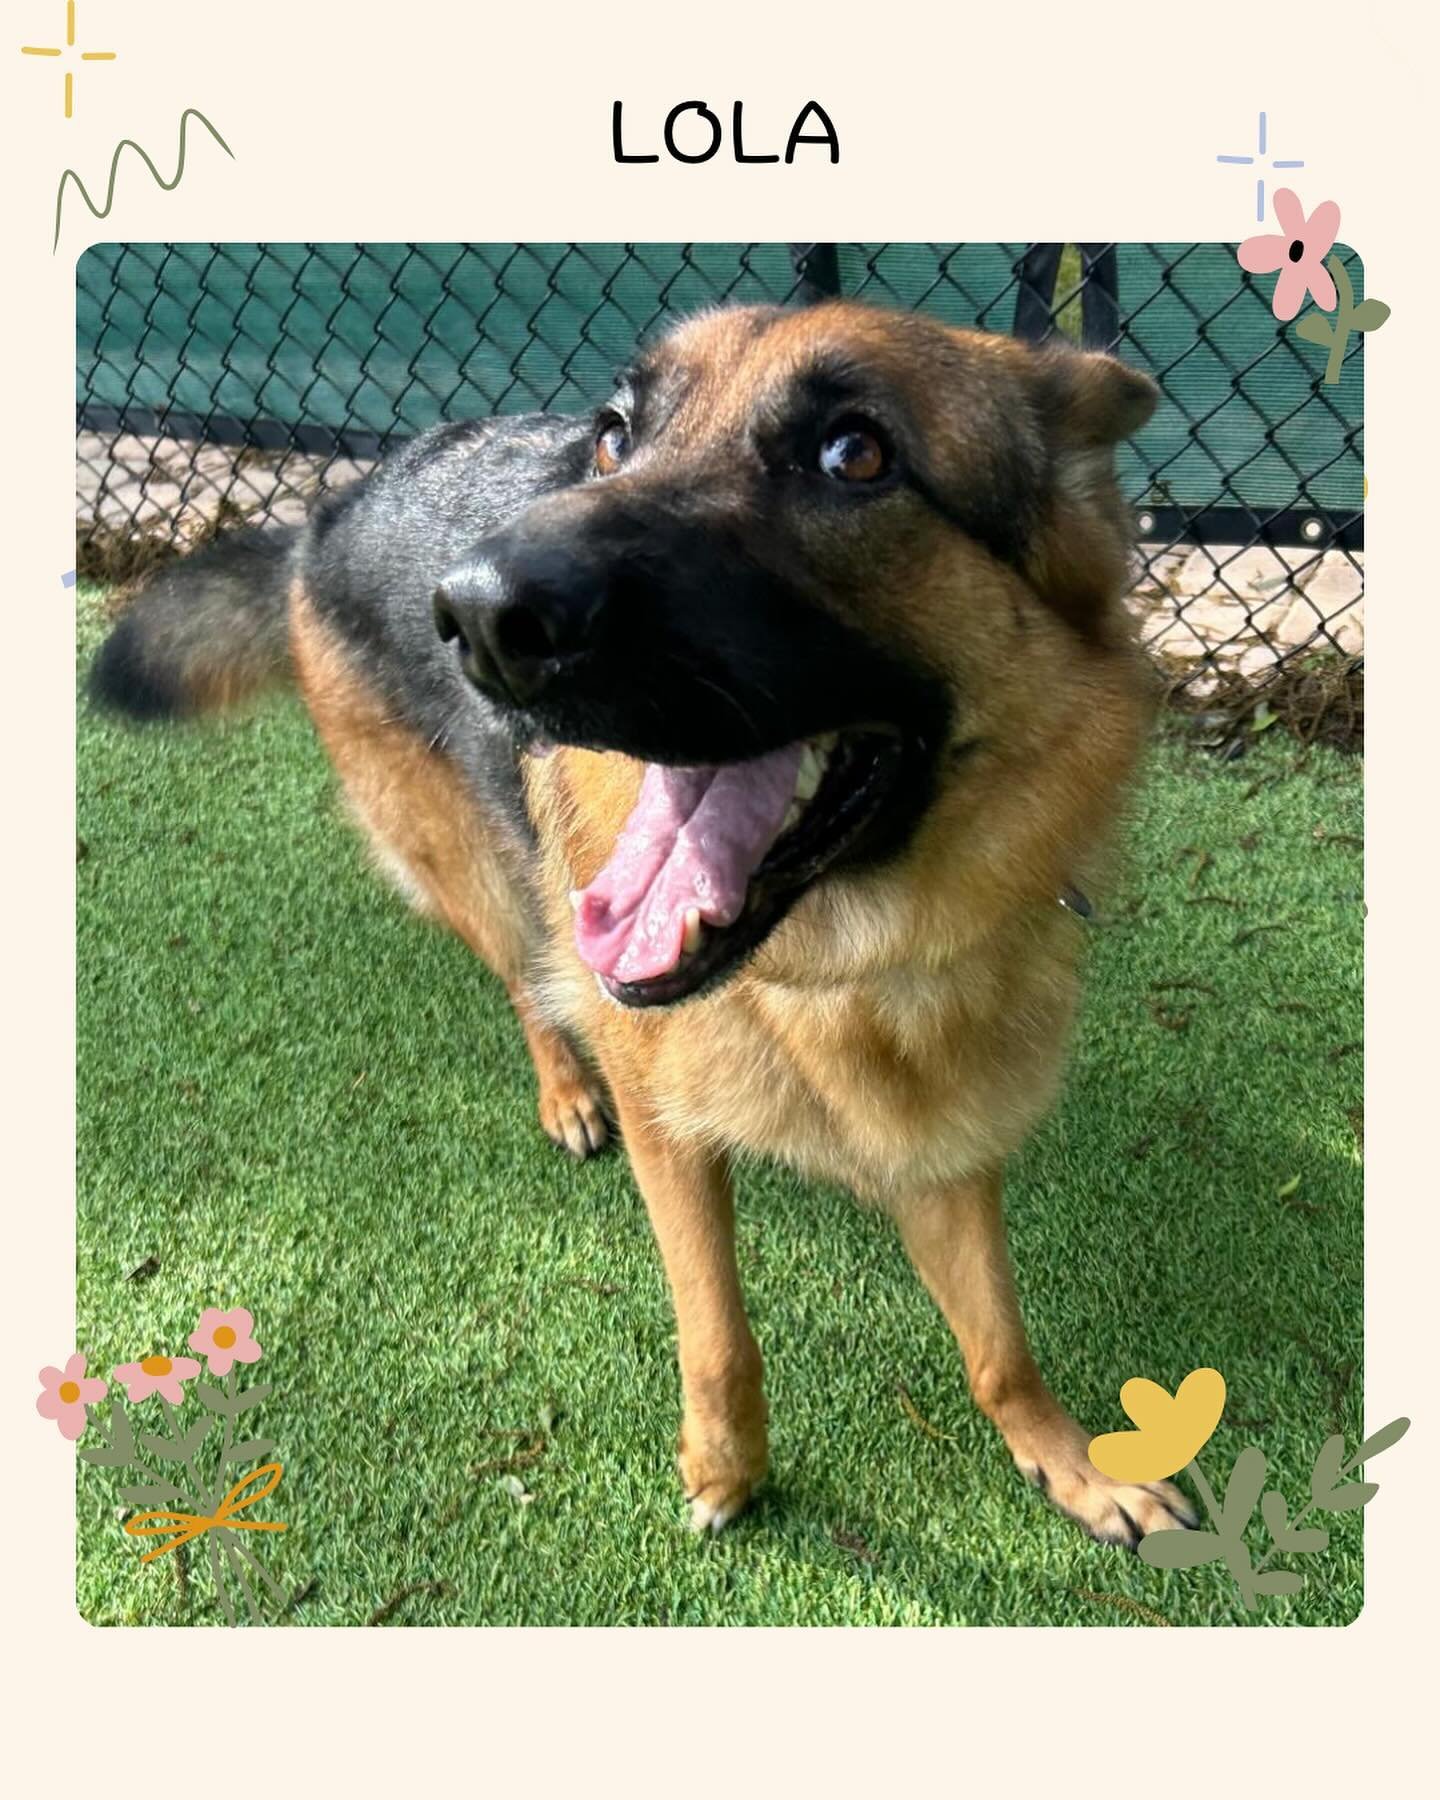 For National German Shepherd Day, we are sharing some of our german shepherd friends! 🐶😁❤️ #jazzswonderland #doggiedaycare #dogboarding #boarding #gainesville #nobreedrestrictions #floridadogs #rover #dogphotography #happydogs #bestdoggiedaycare #g